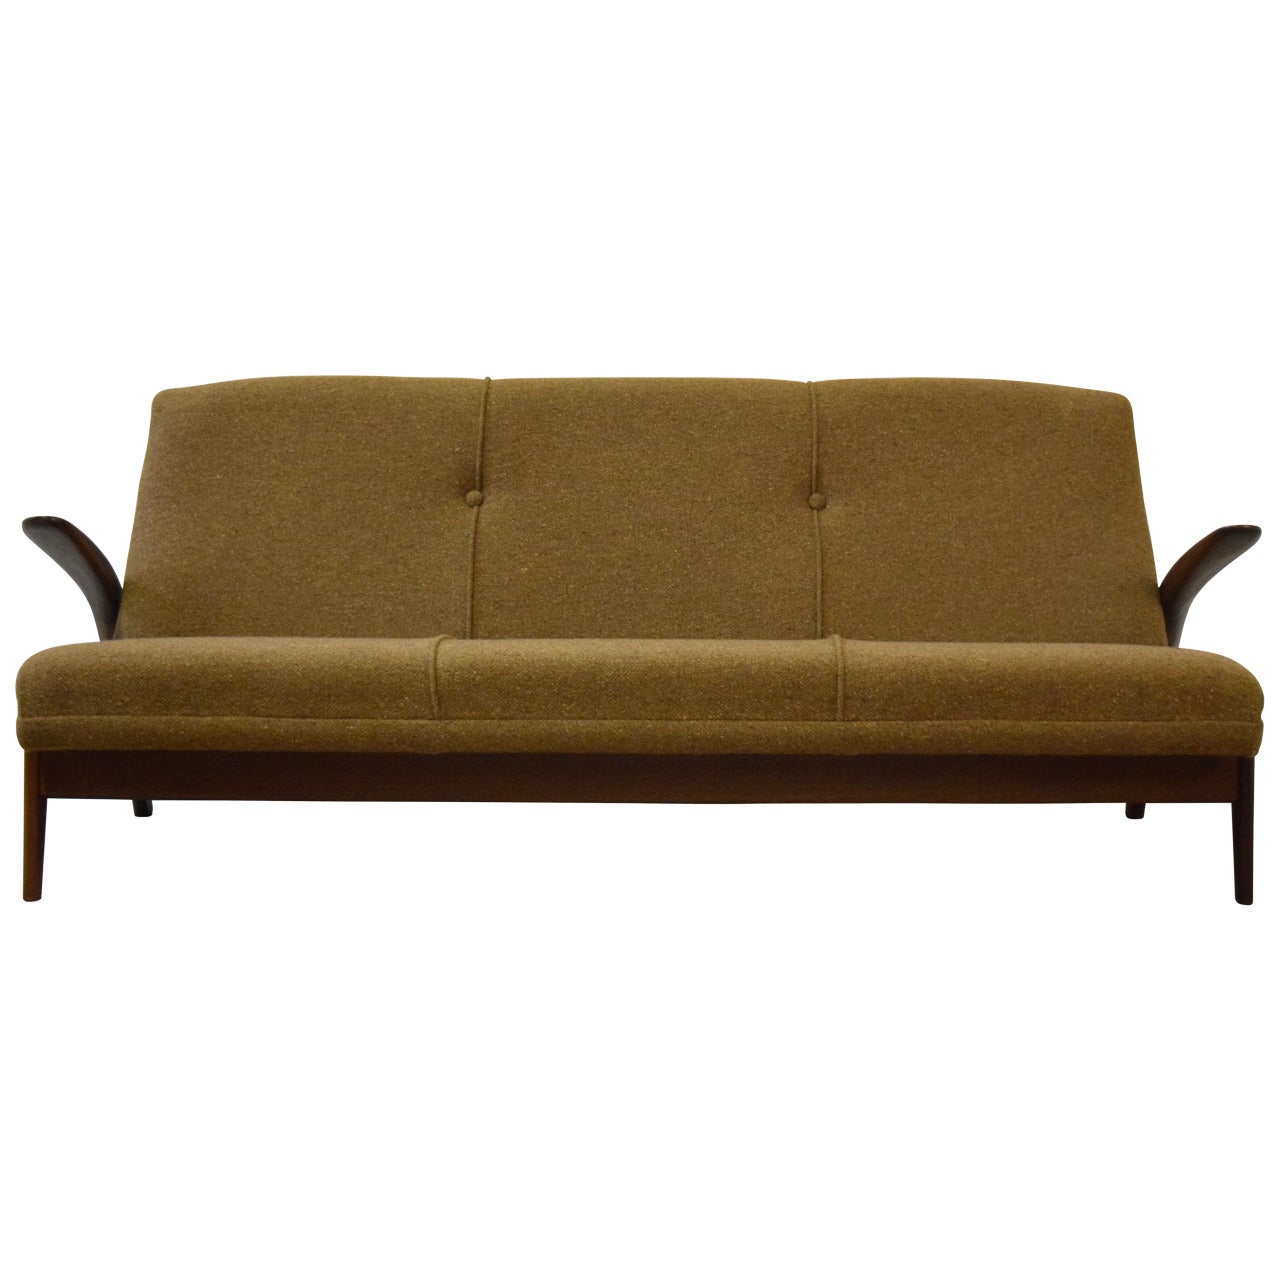 Sculptural Gimson and Slater Three-Seater Sofa